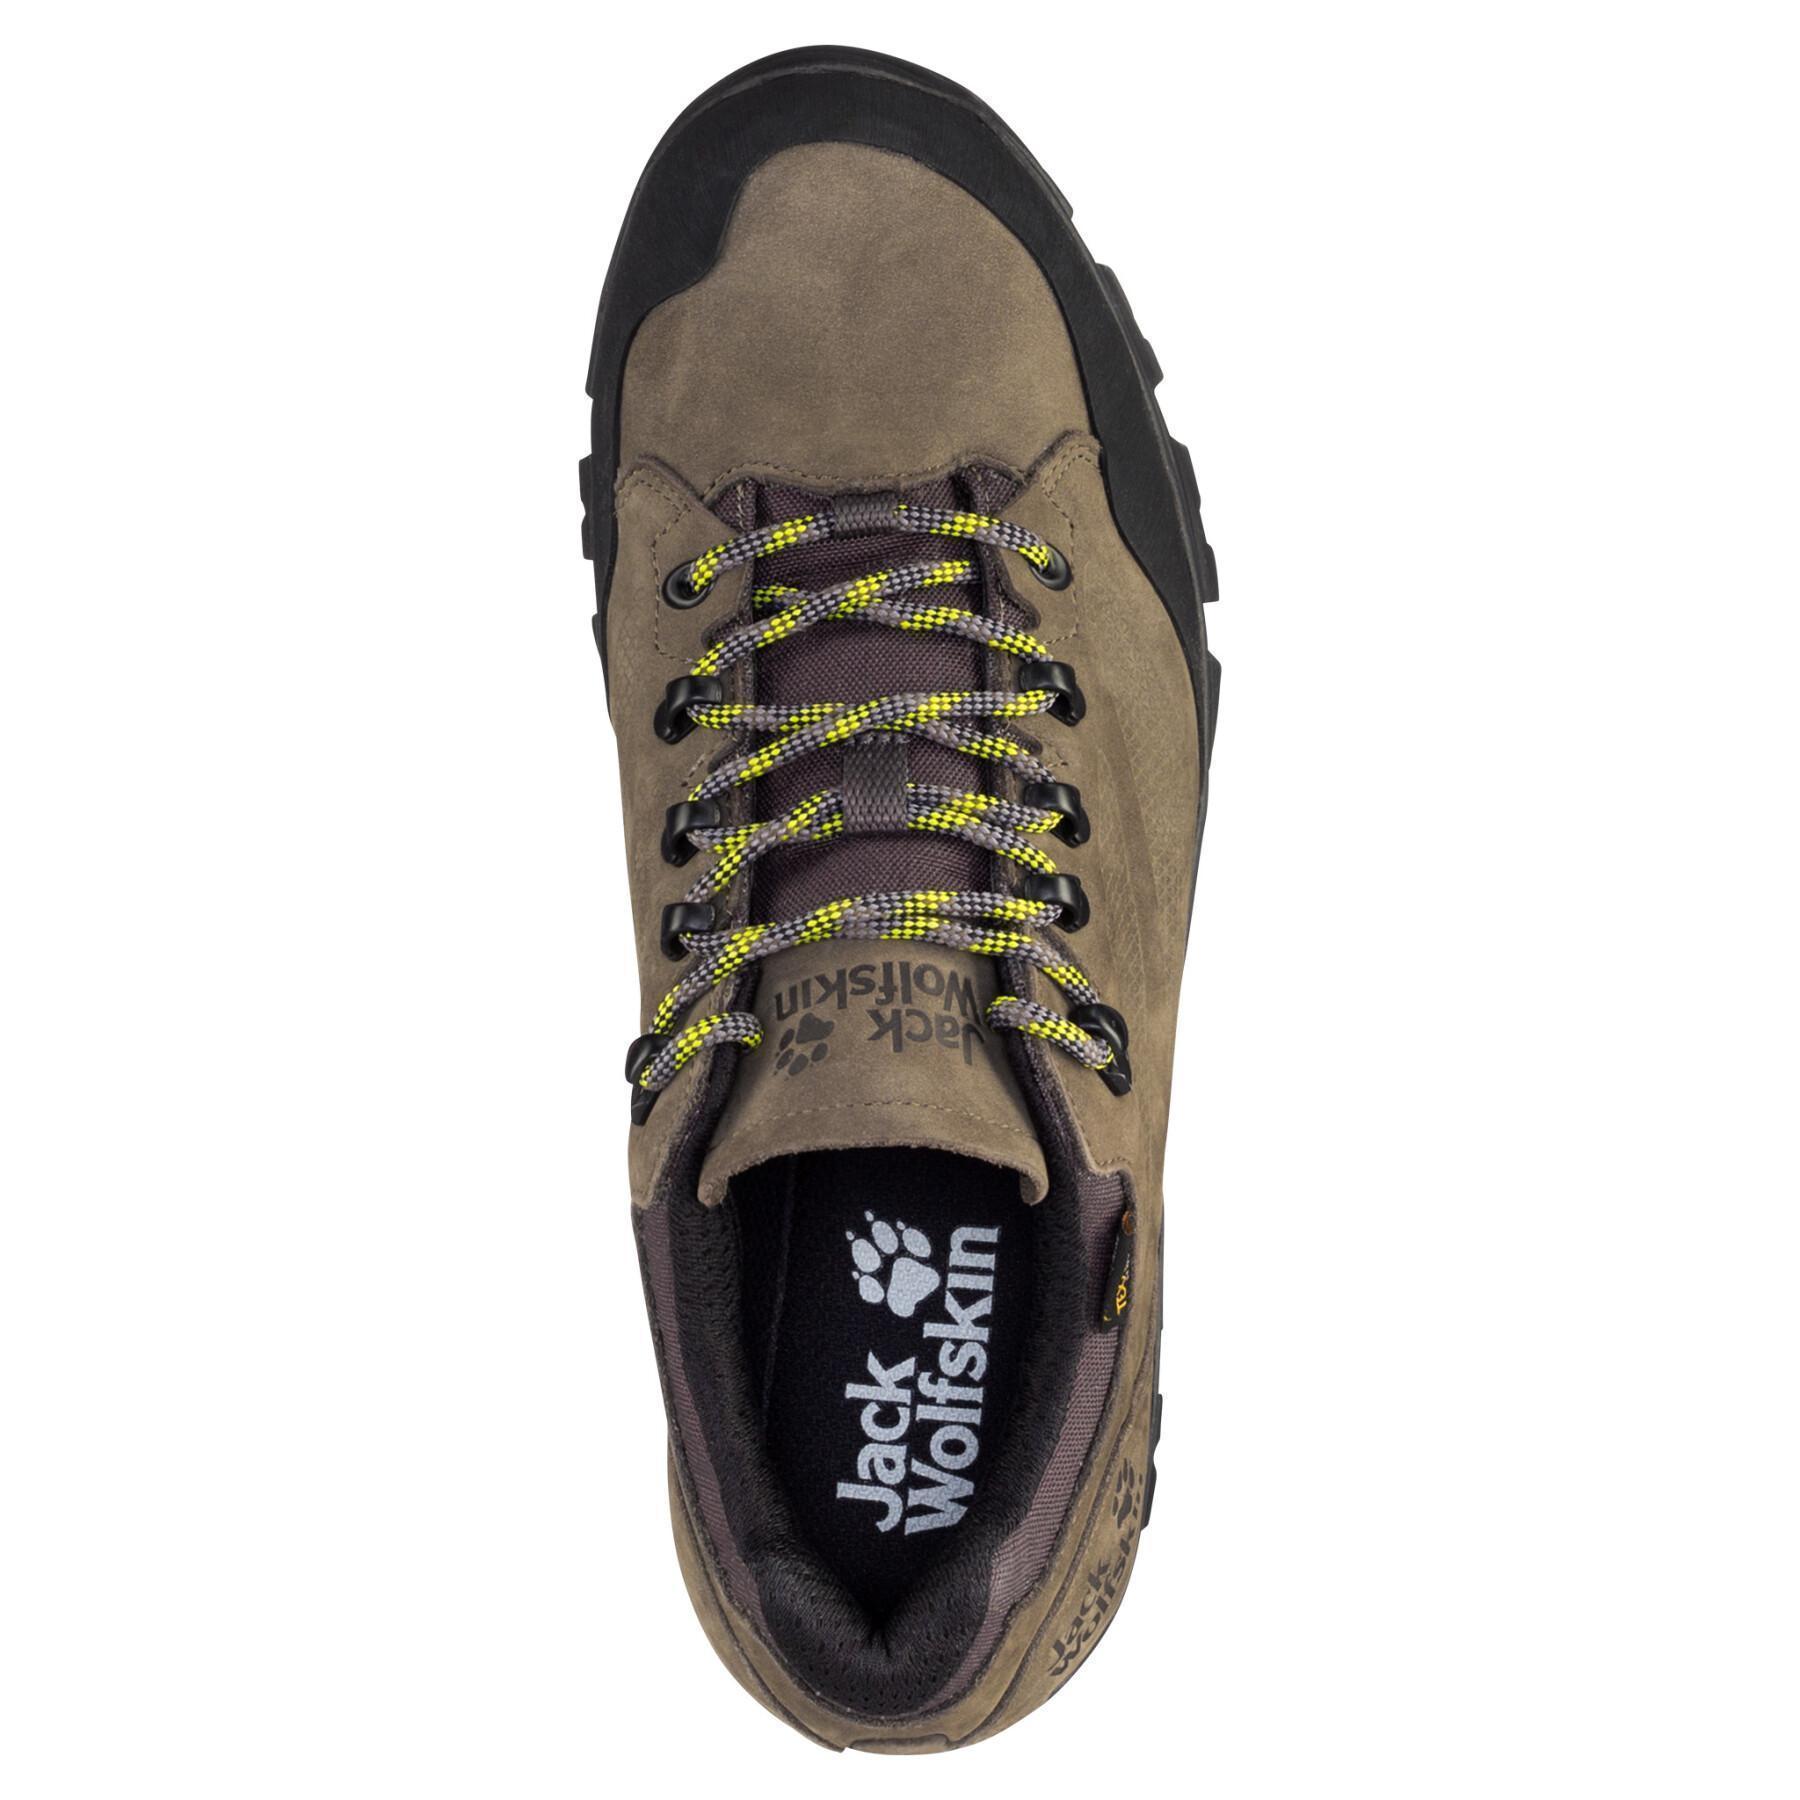 Hiking shoes Jack Wolfskin Rebellion Texapore GT